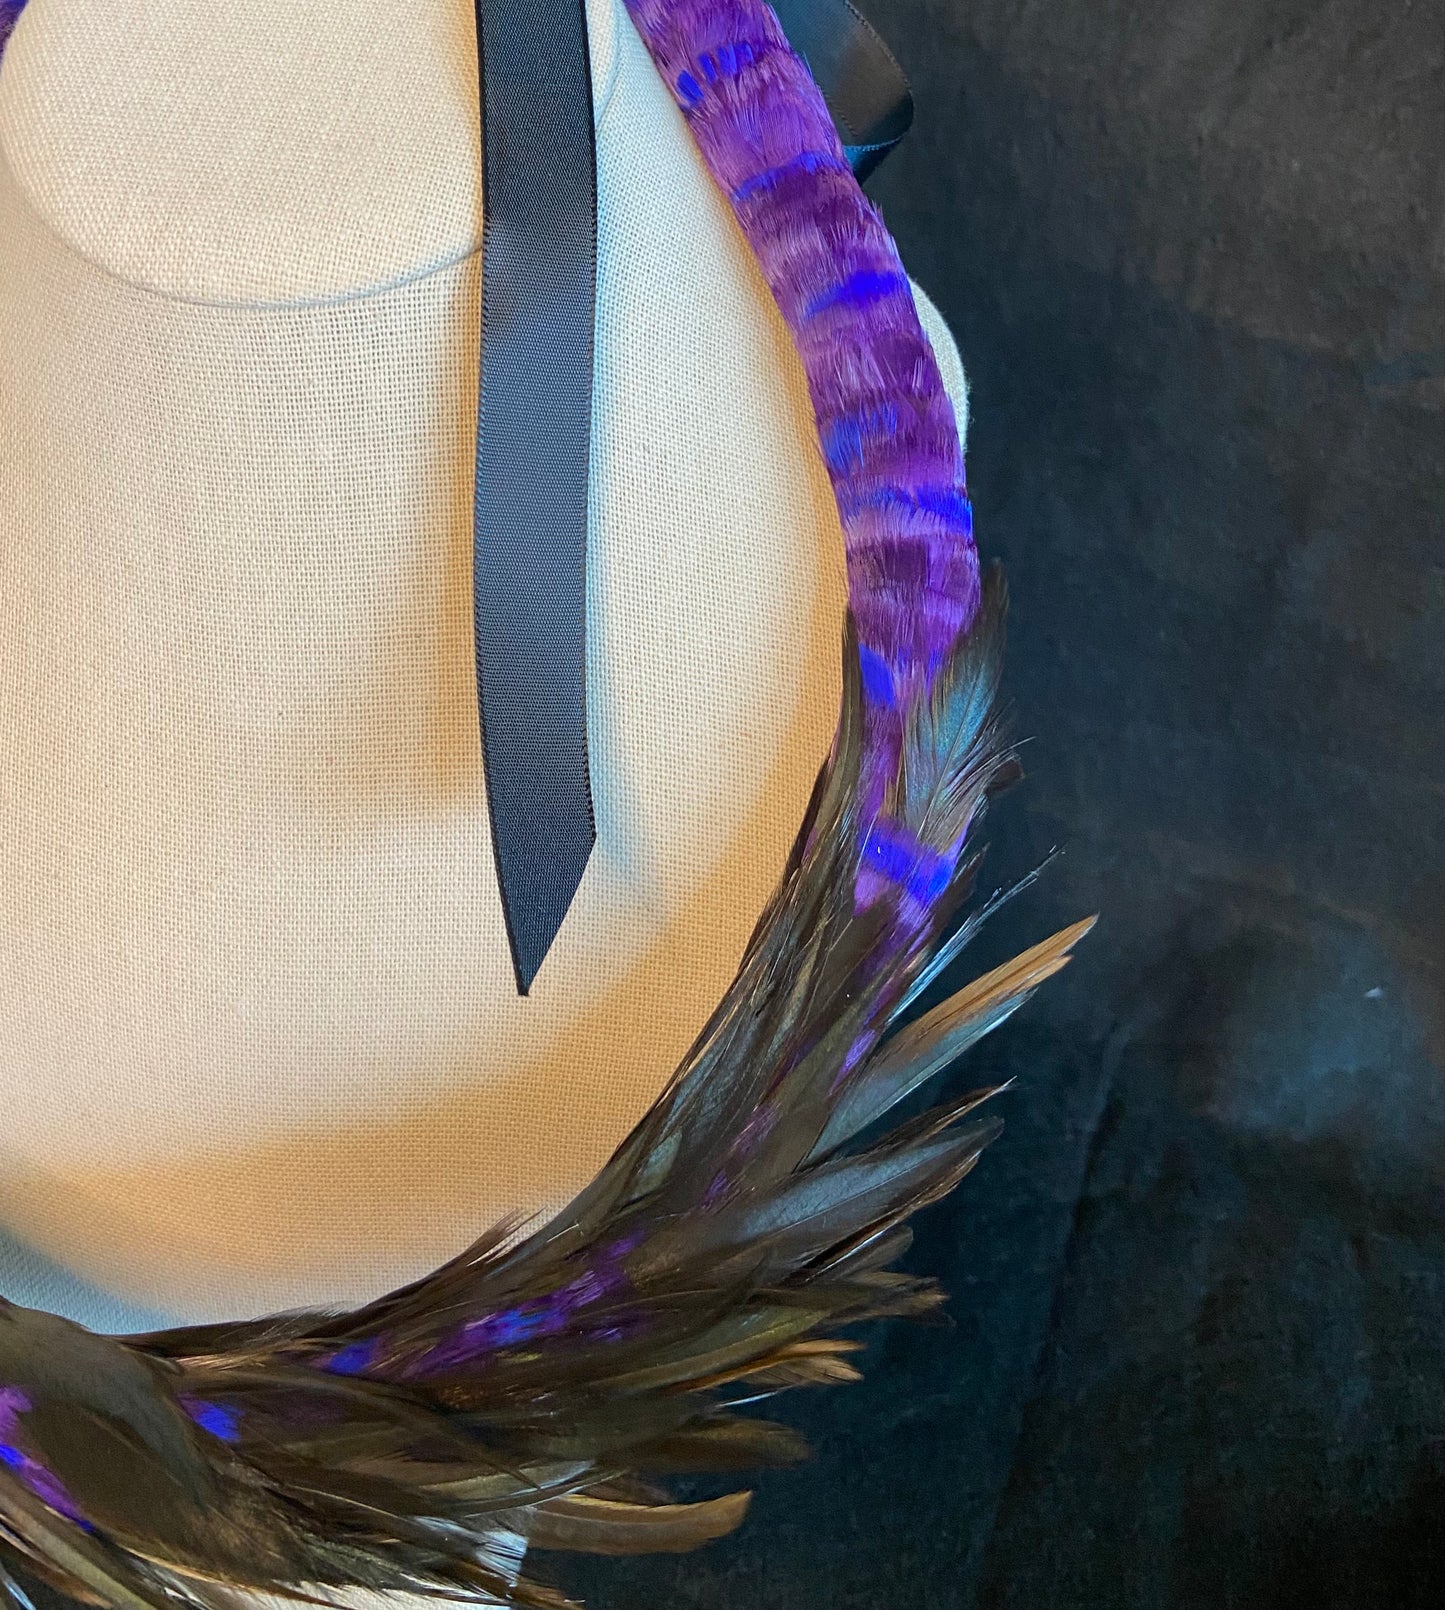 Asymmetric purple/blue lei kamoe with black rooster accents